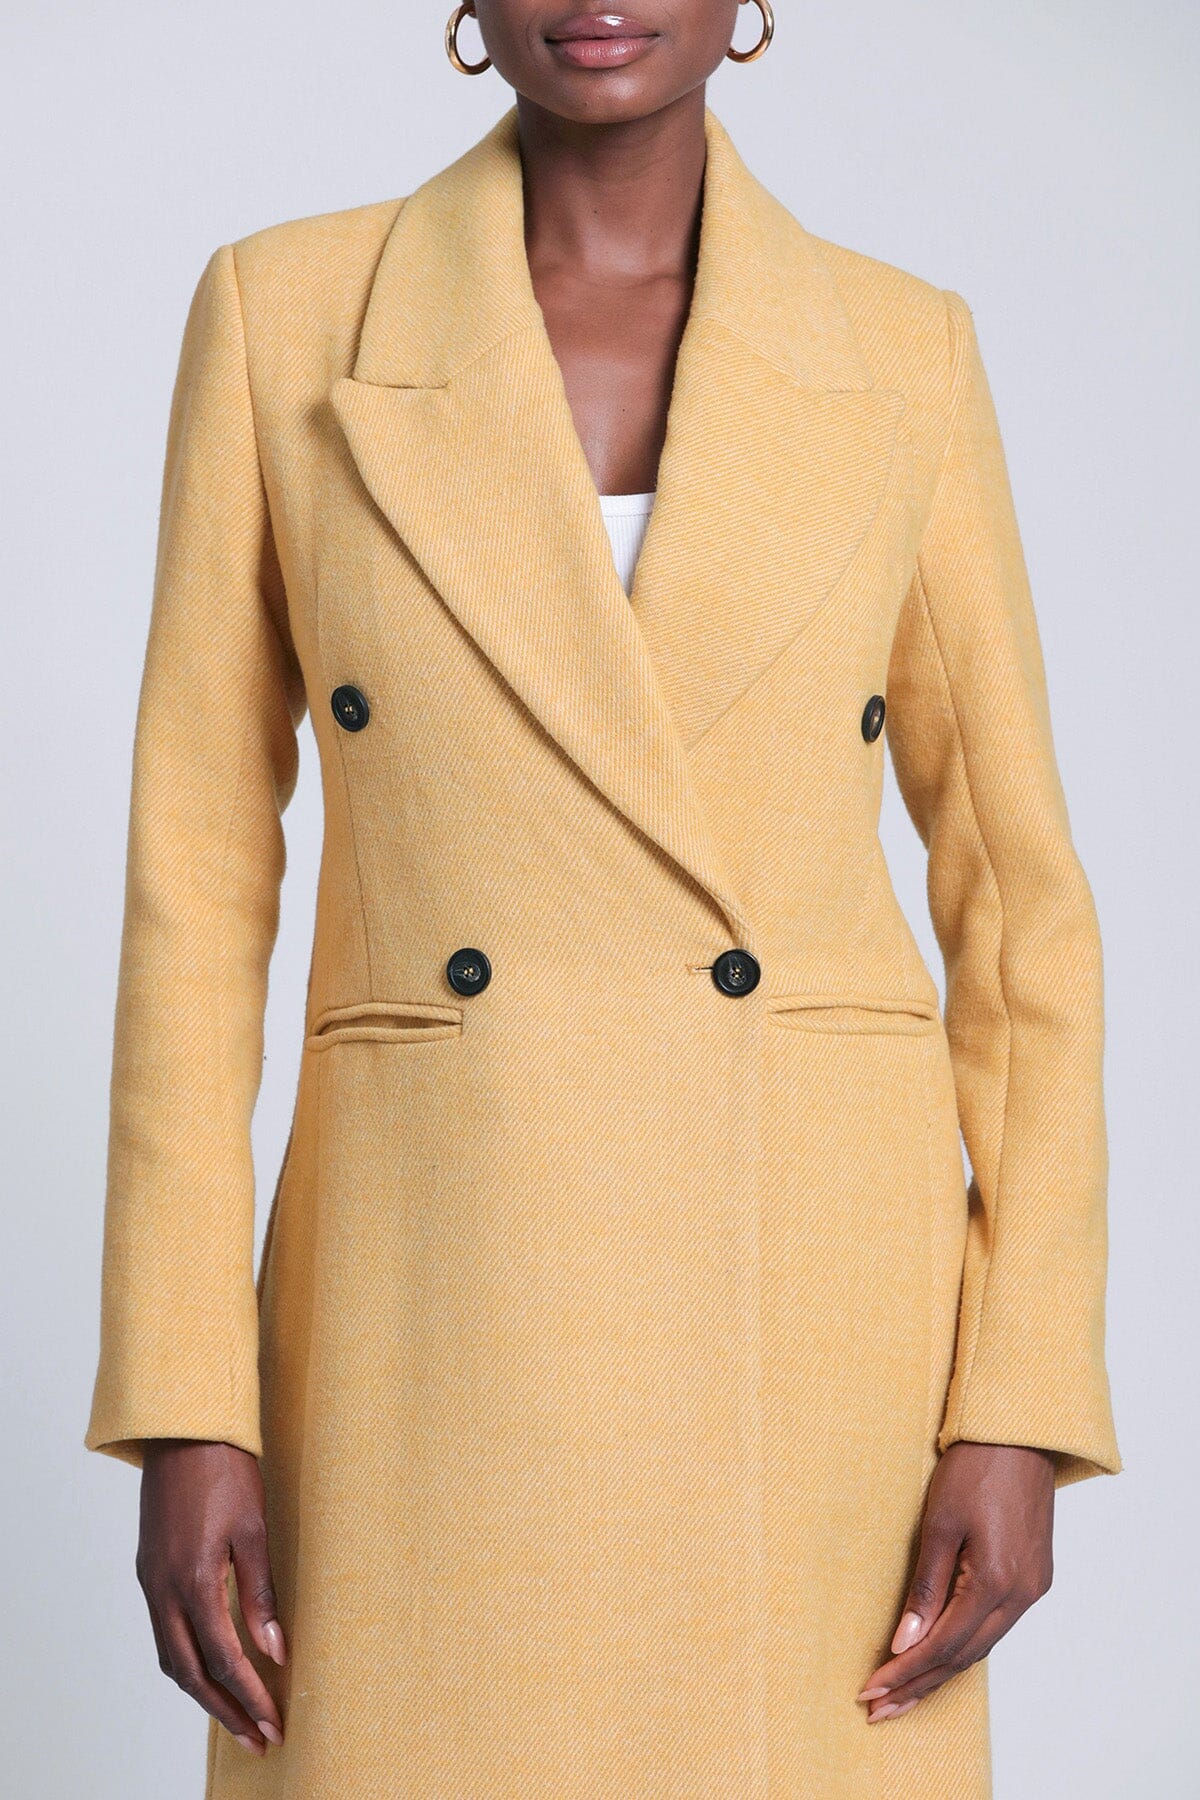 Dressy mustard yellow tailored double-breasted long coat by Avec Les Filles Coats & Jackets